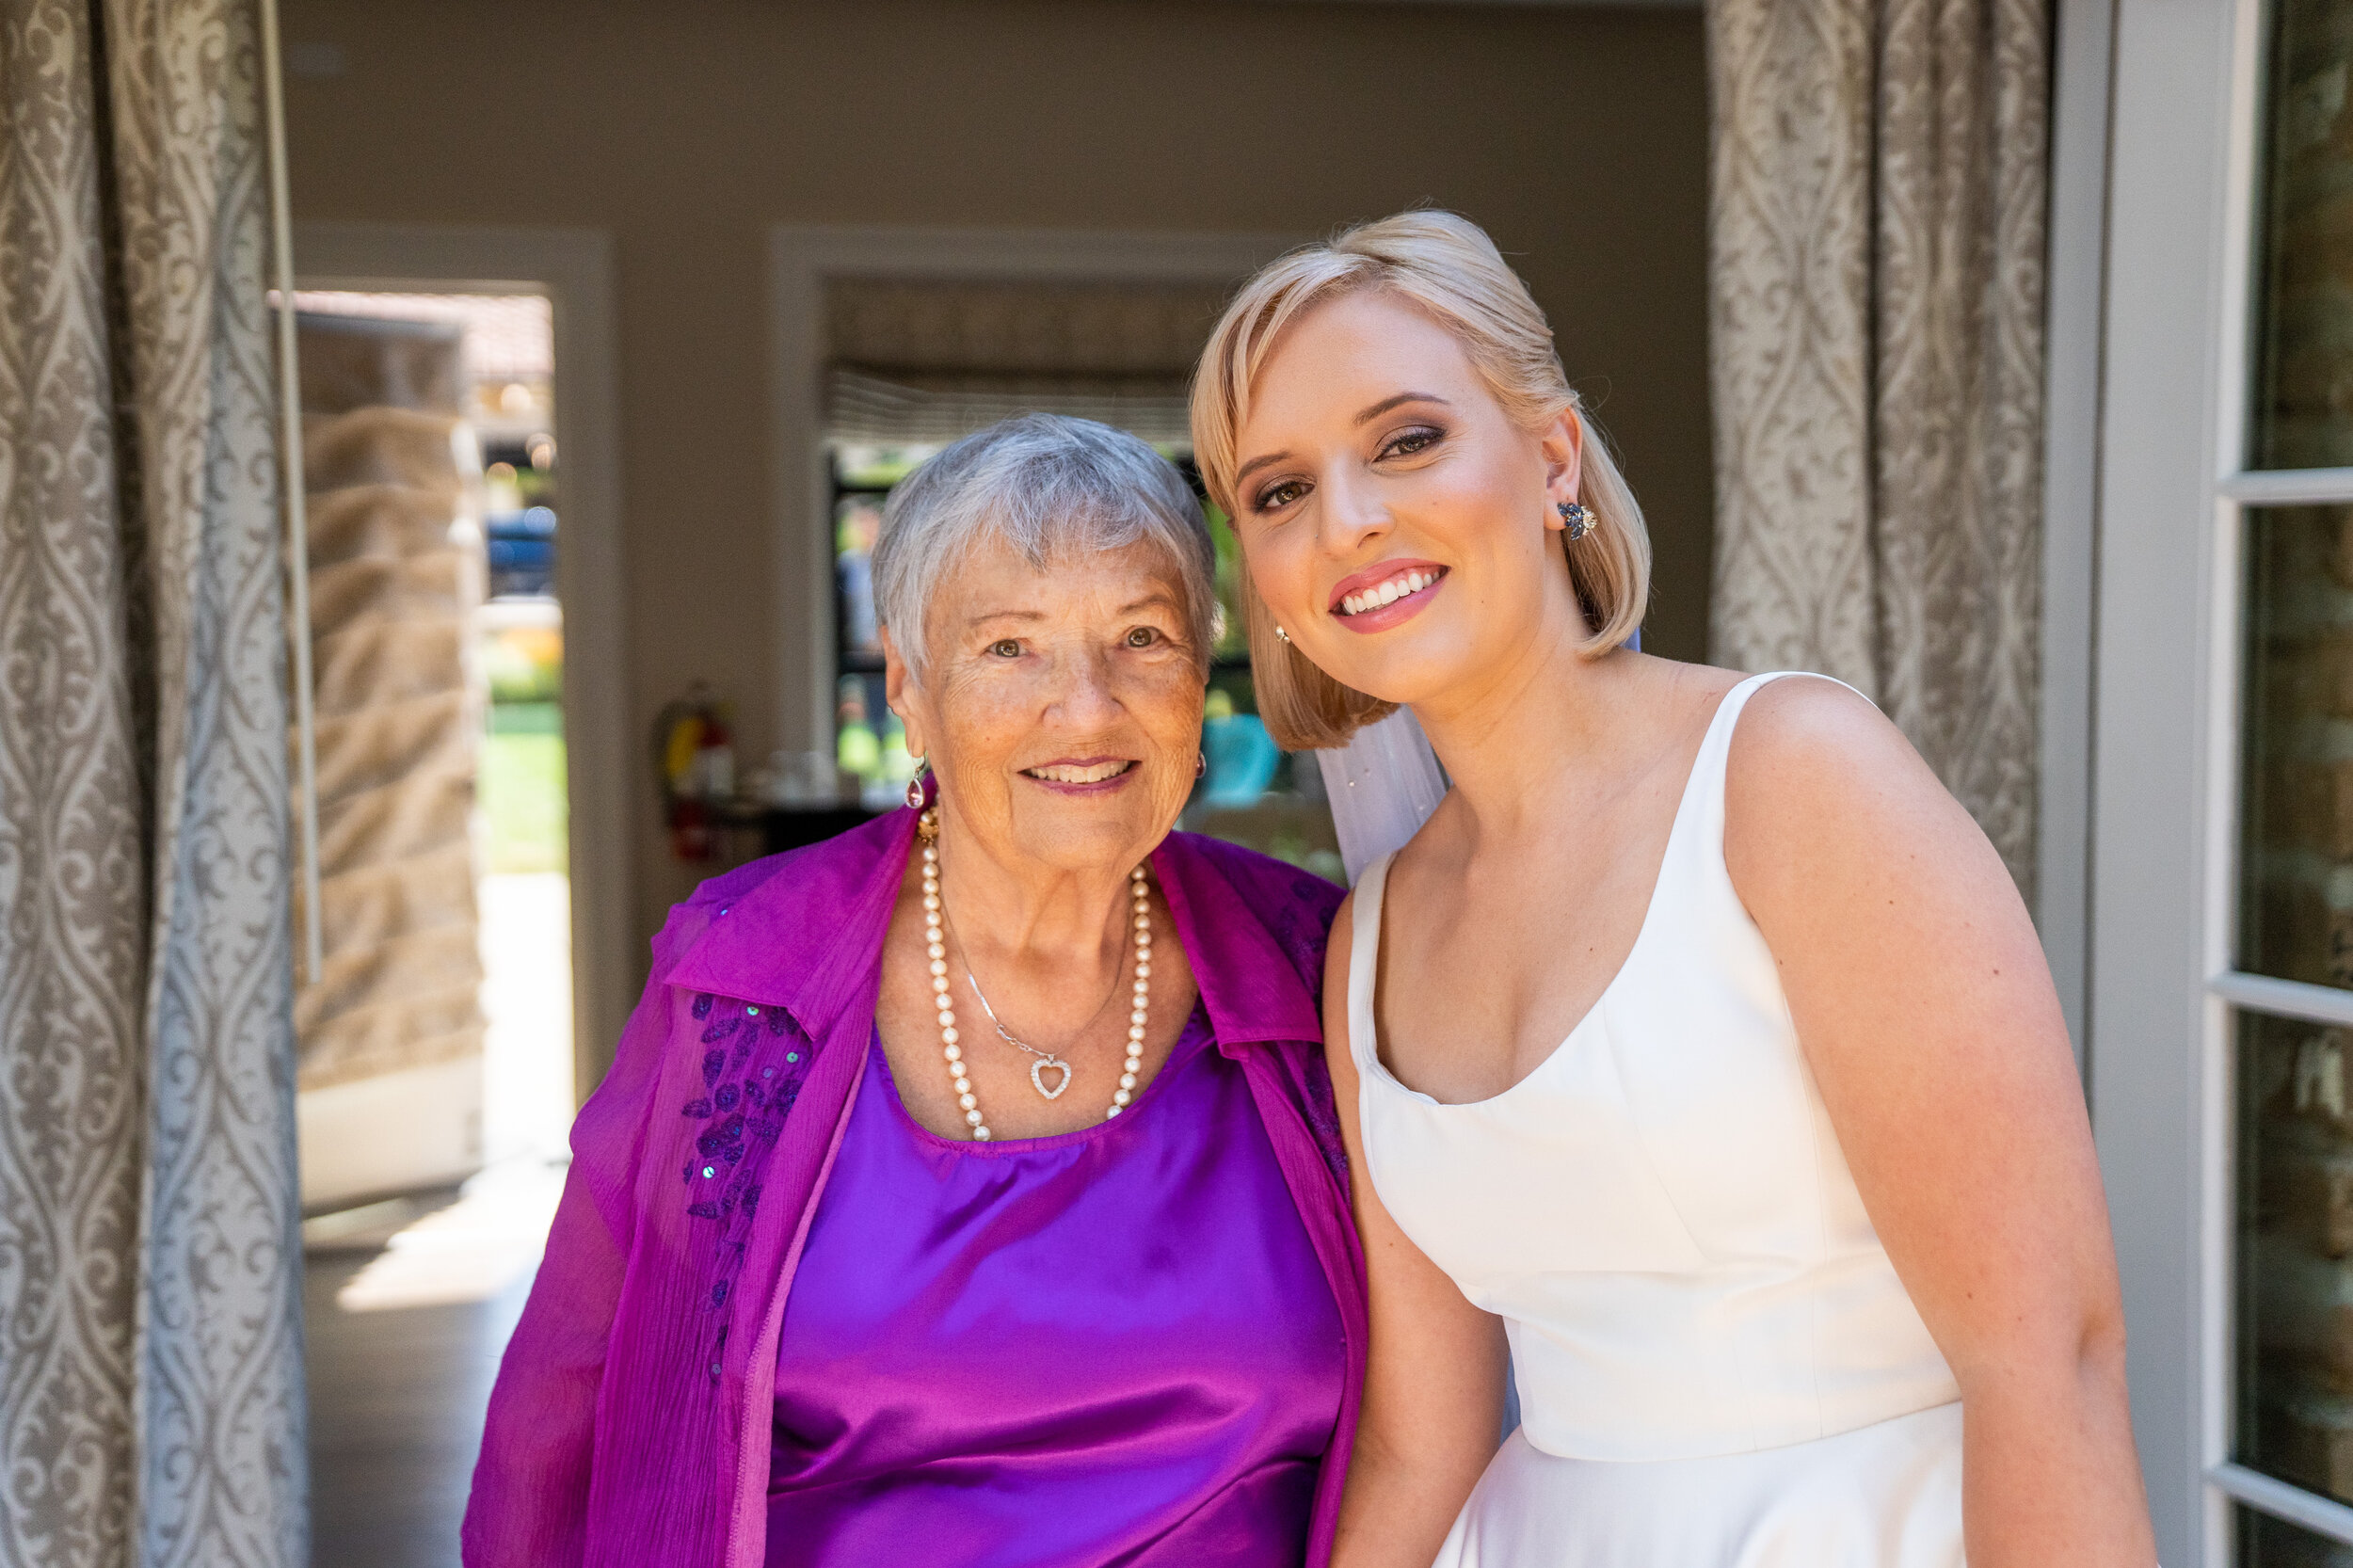 The Bride and her Grandmother share a special moment before the ceremony